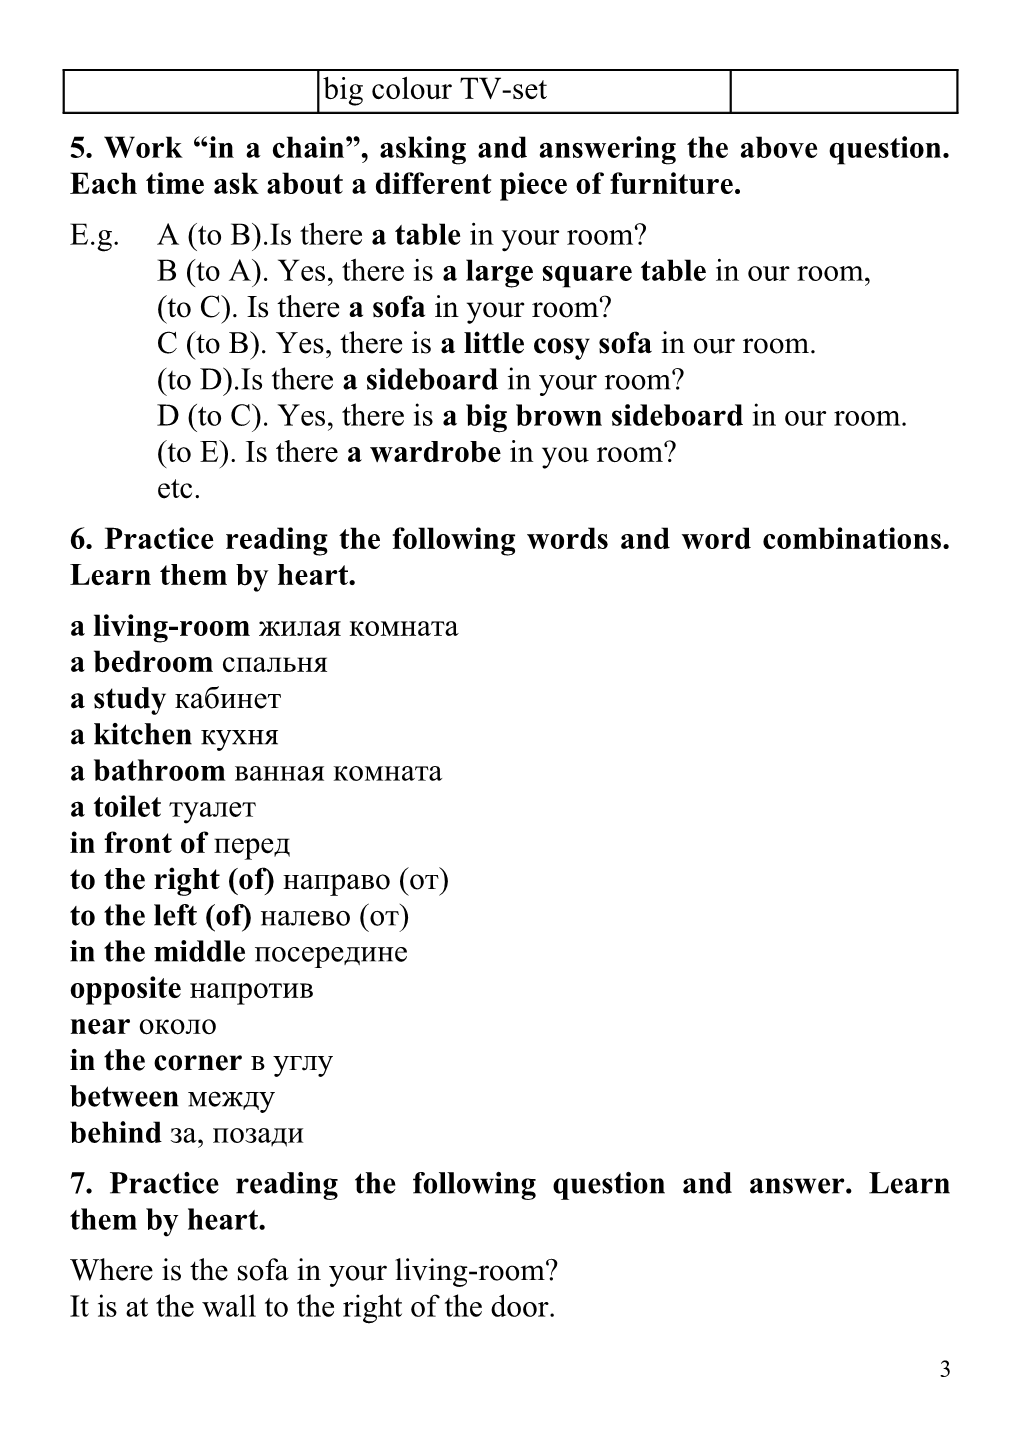 1. Practice Reading the Following Words and Word Combinations. Learn Them by Heart